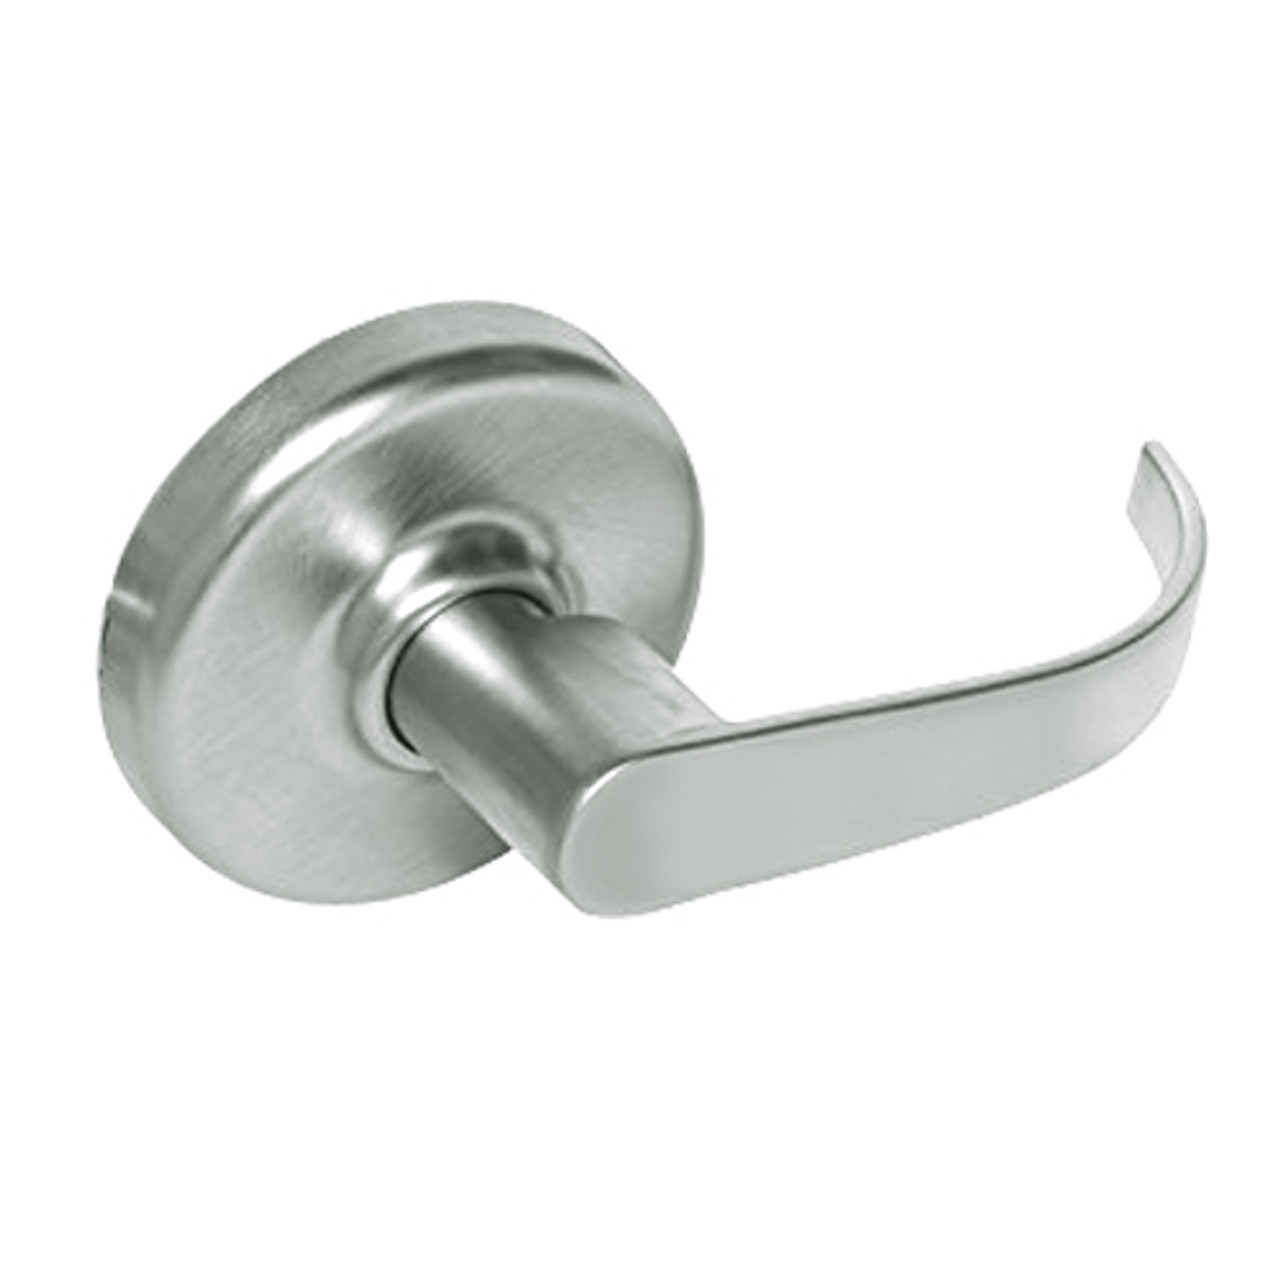 CL3380-PZD-618 Corbin CL3300 Series Extra Heavy Duty Passage with Blank Plate Cylindrical Locksets with Princeton Lever in Bright Nickel Plated Finish